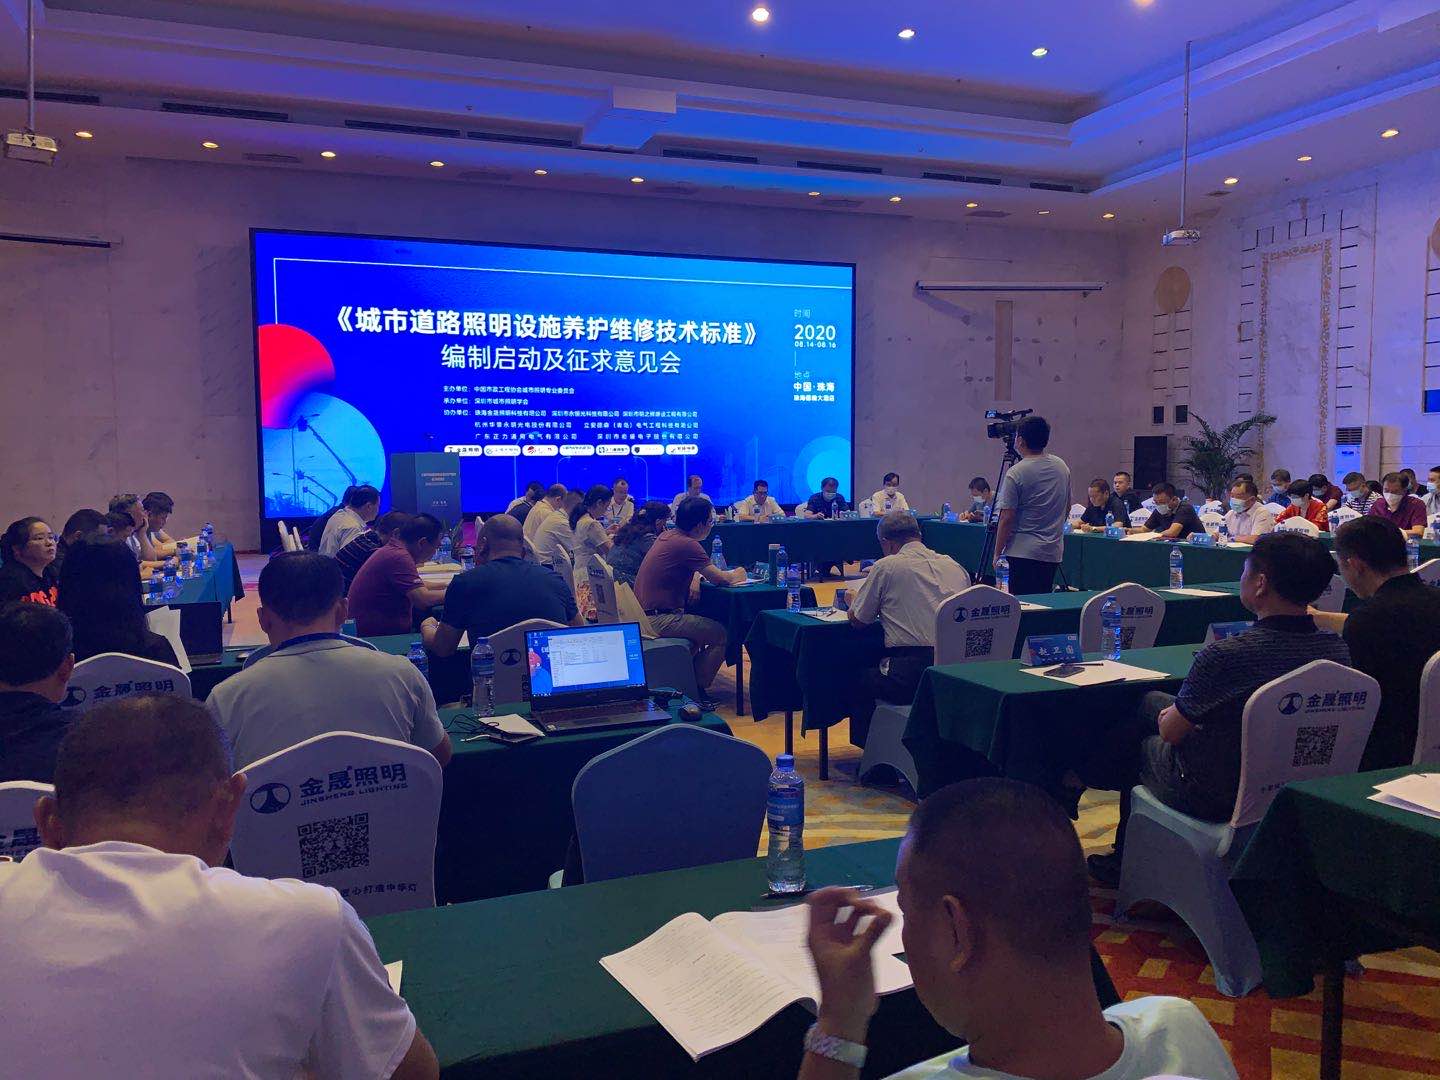 Congratulation!!! The Seminar “Technical standard for facilities maintenance of urban road lighting” was hold in Zhuhai, Guangdong.